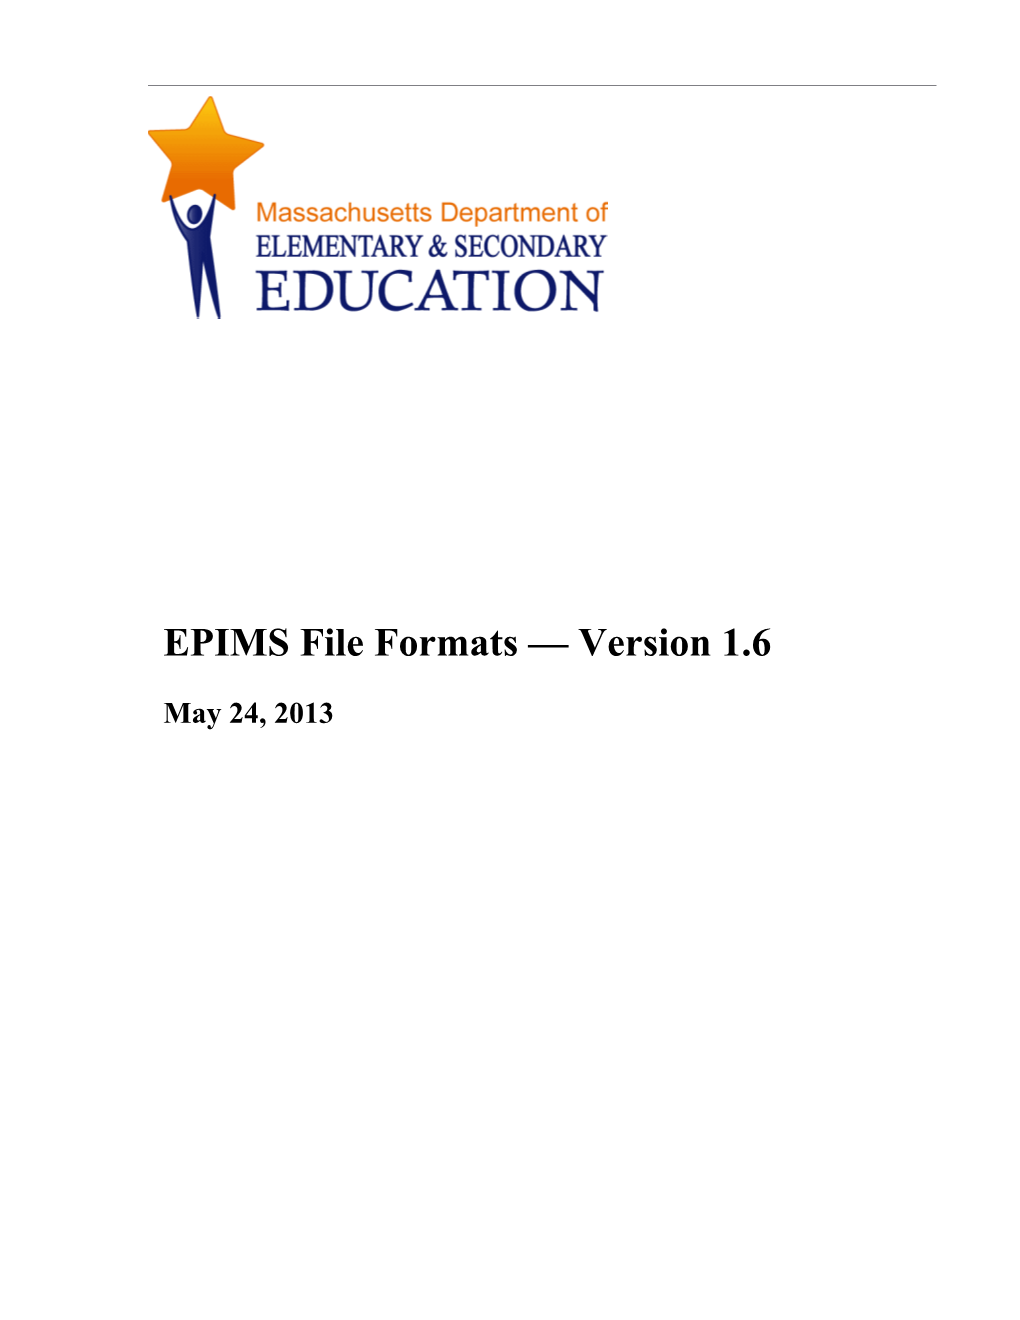 EPIMS File Formats